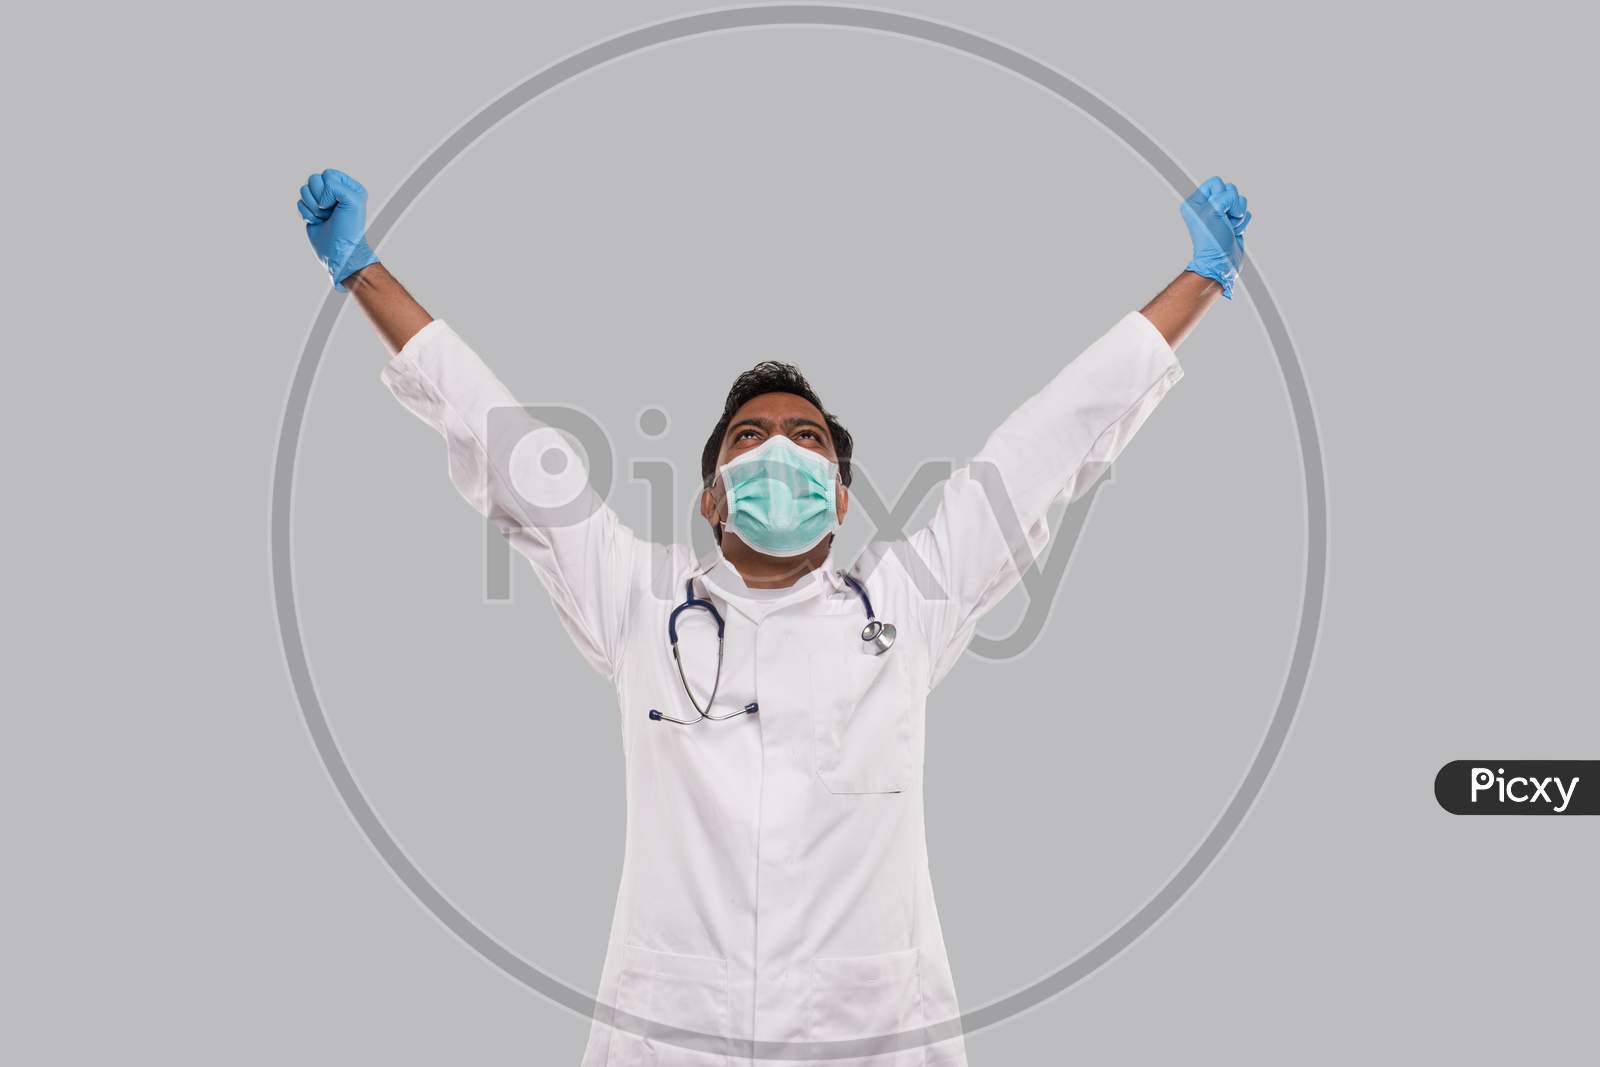 Doctor Excited Hands Up Celebrating Success Wearing Medical Mask And Gloves Isolated. Indian Man Doctor Happy